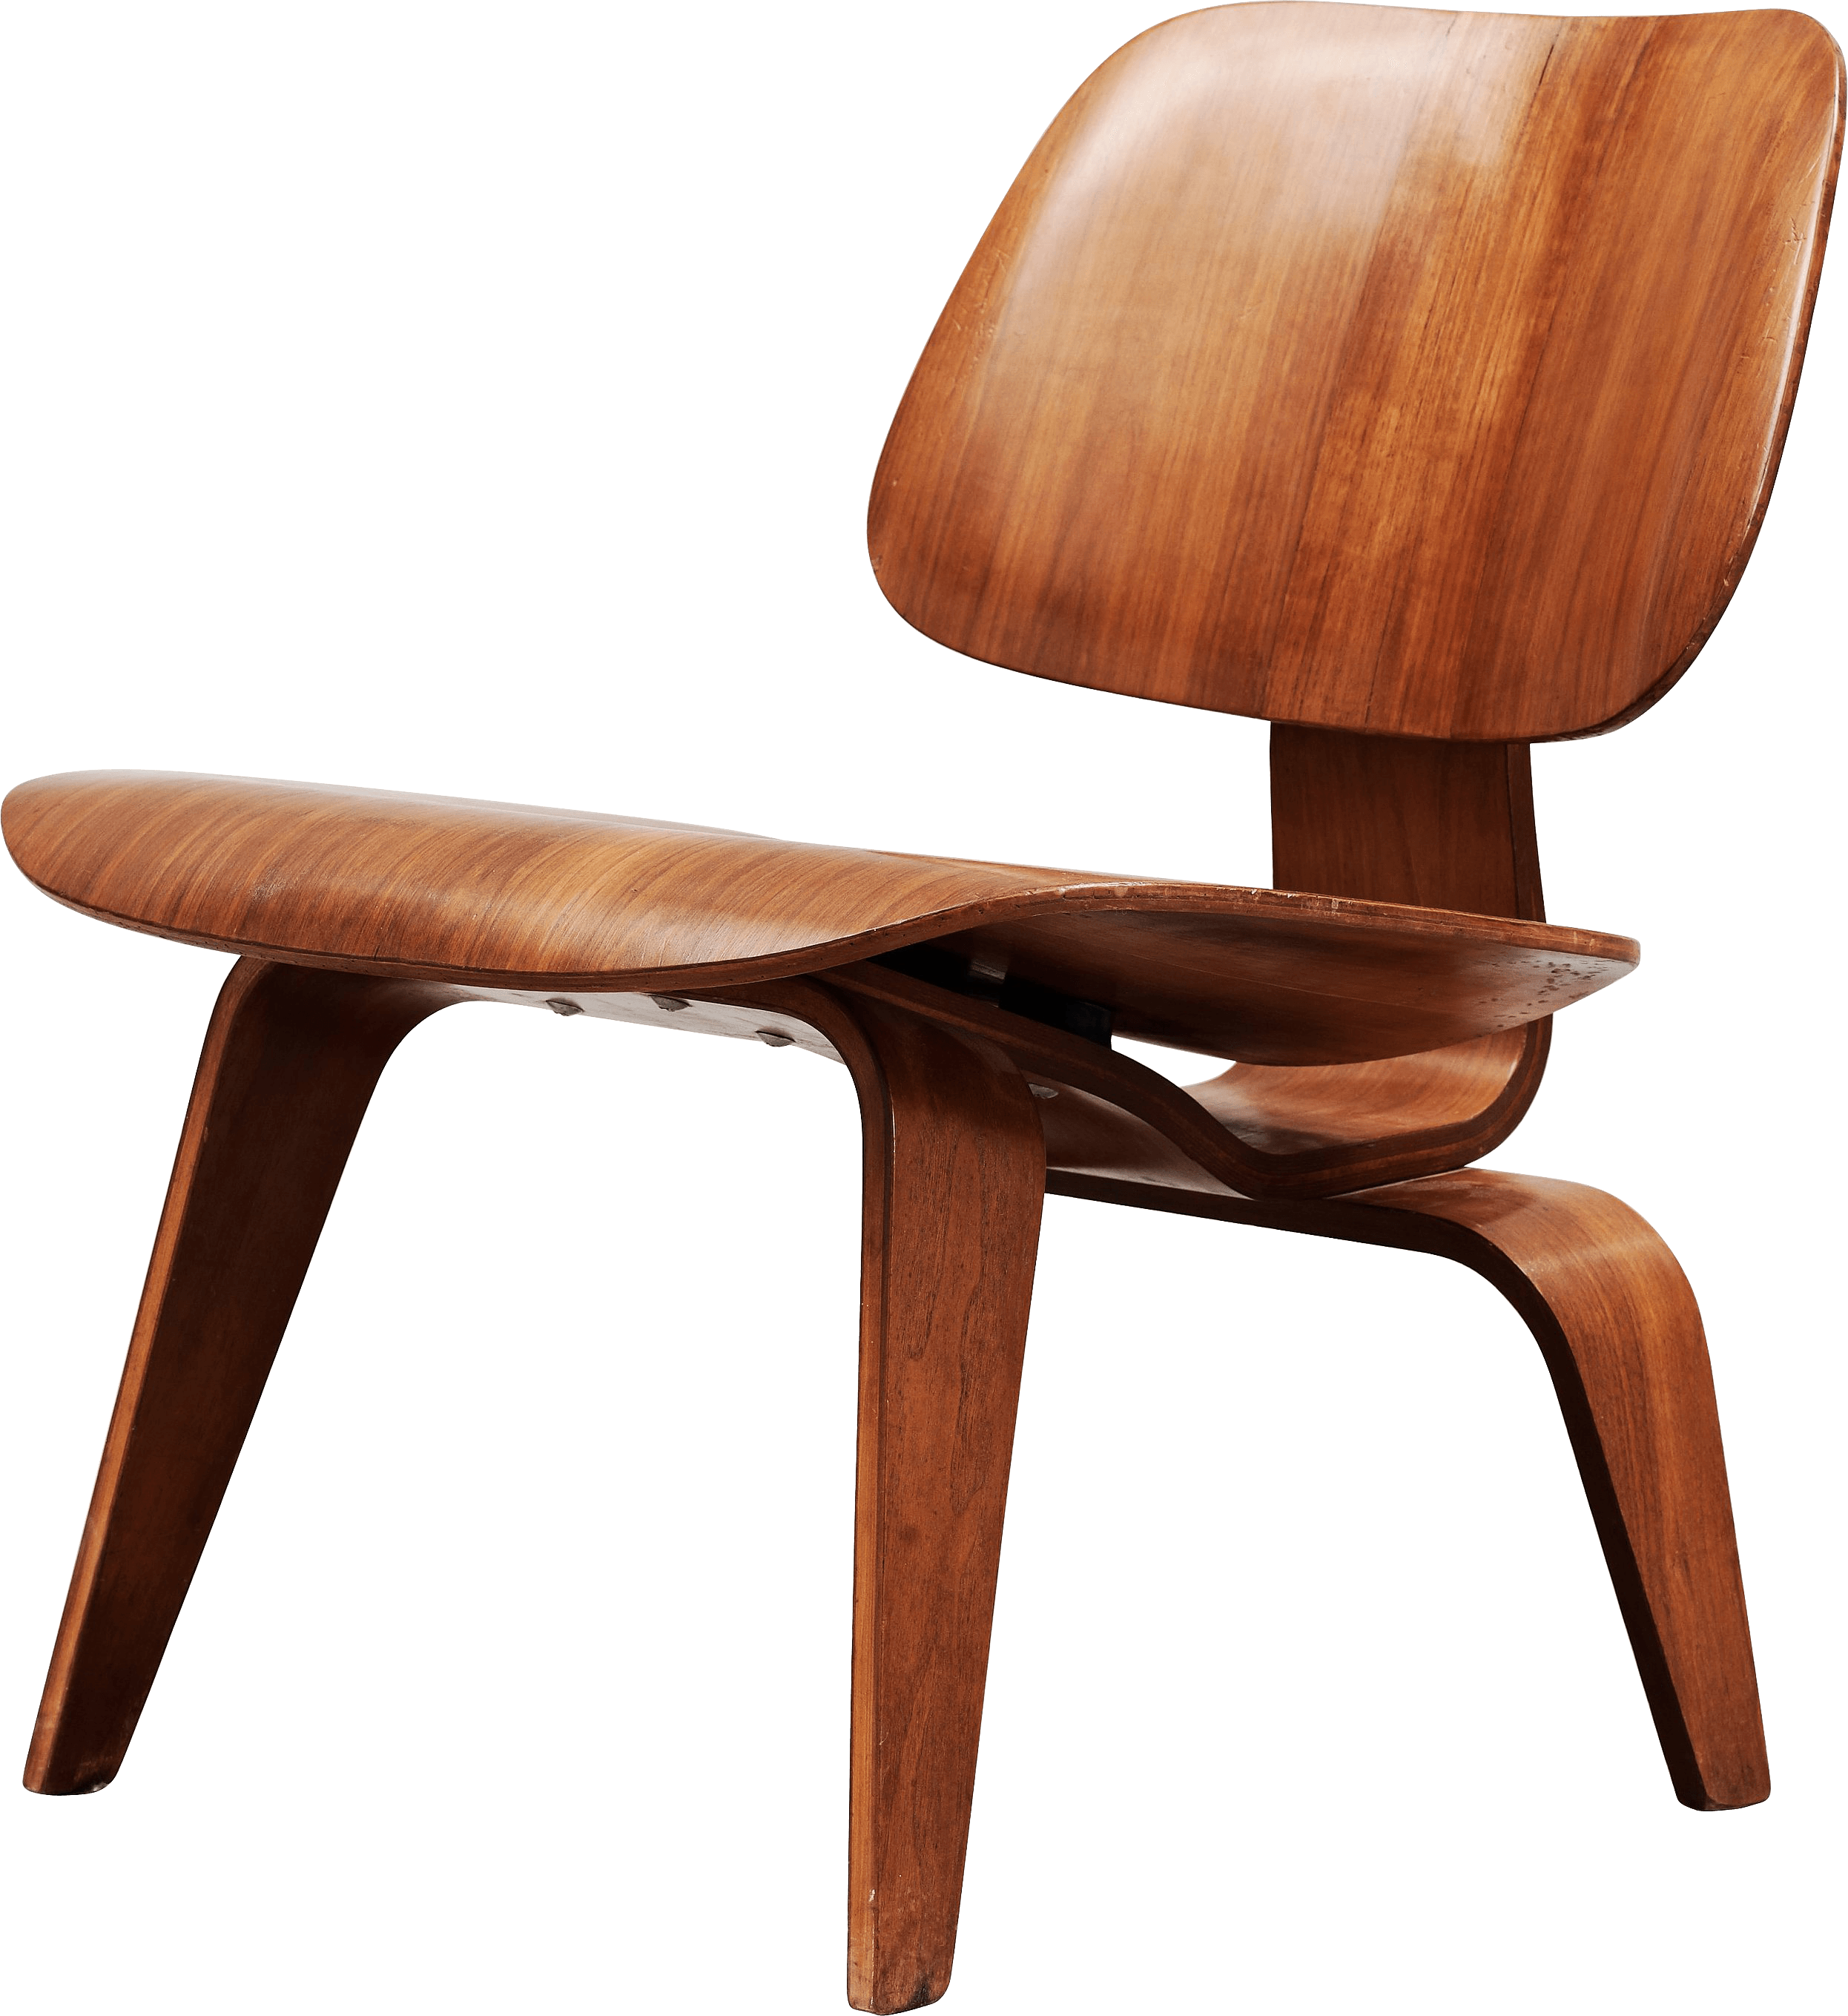 Wooden Antique Chair HQ Image Free PNG Image